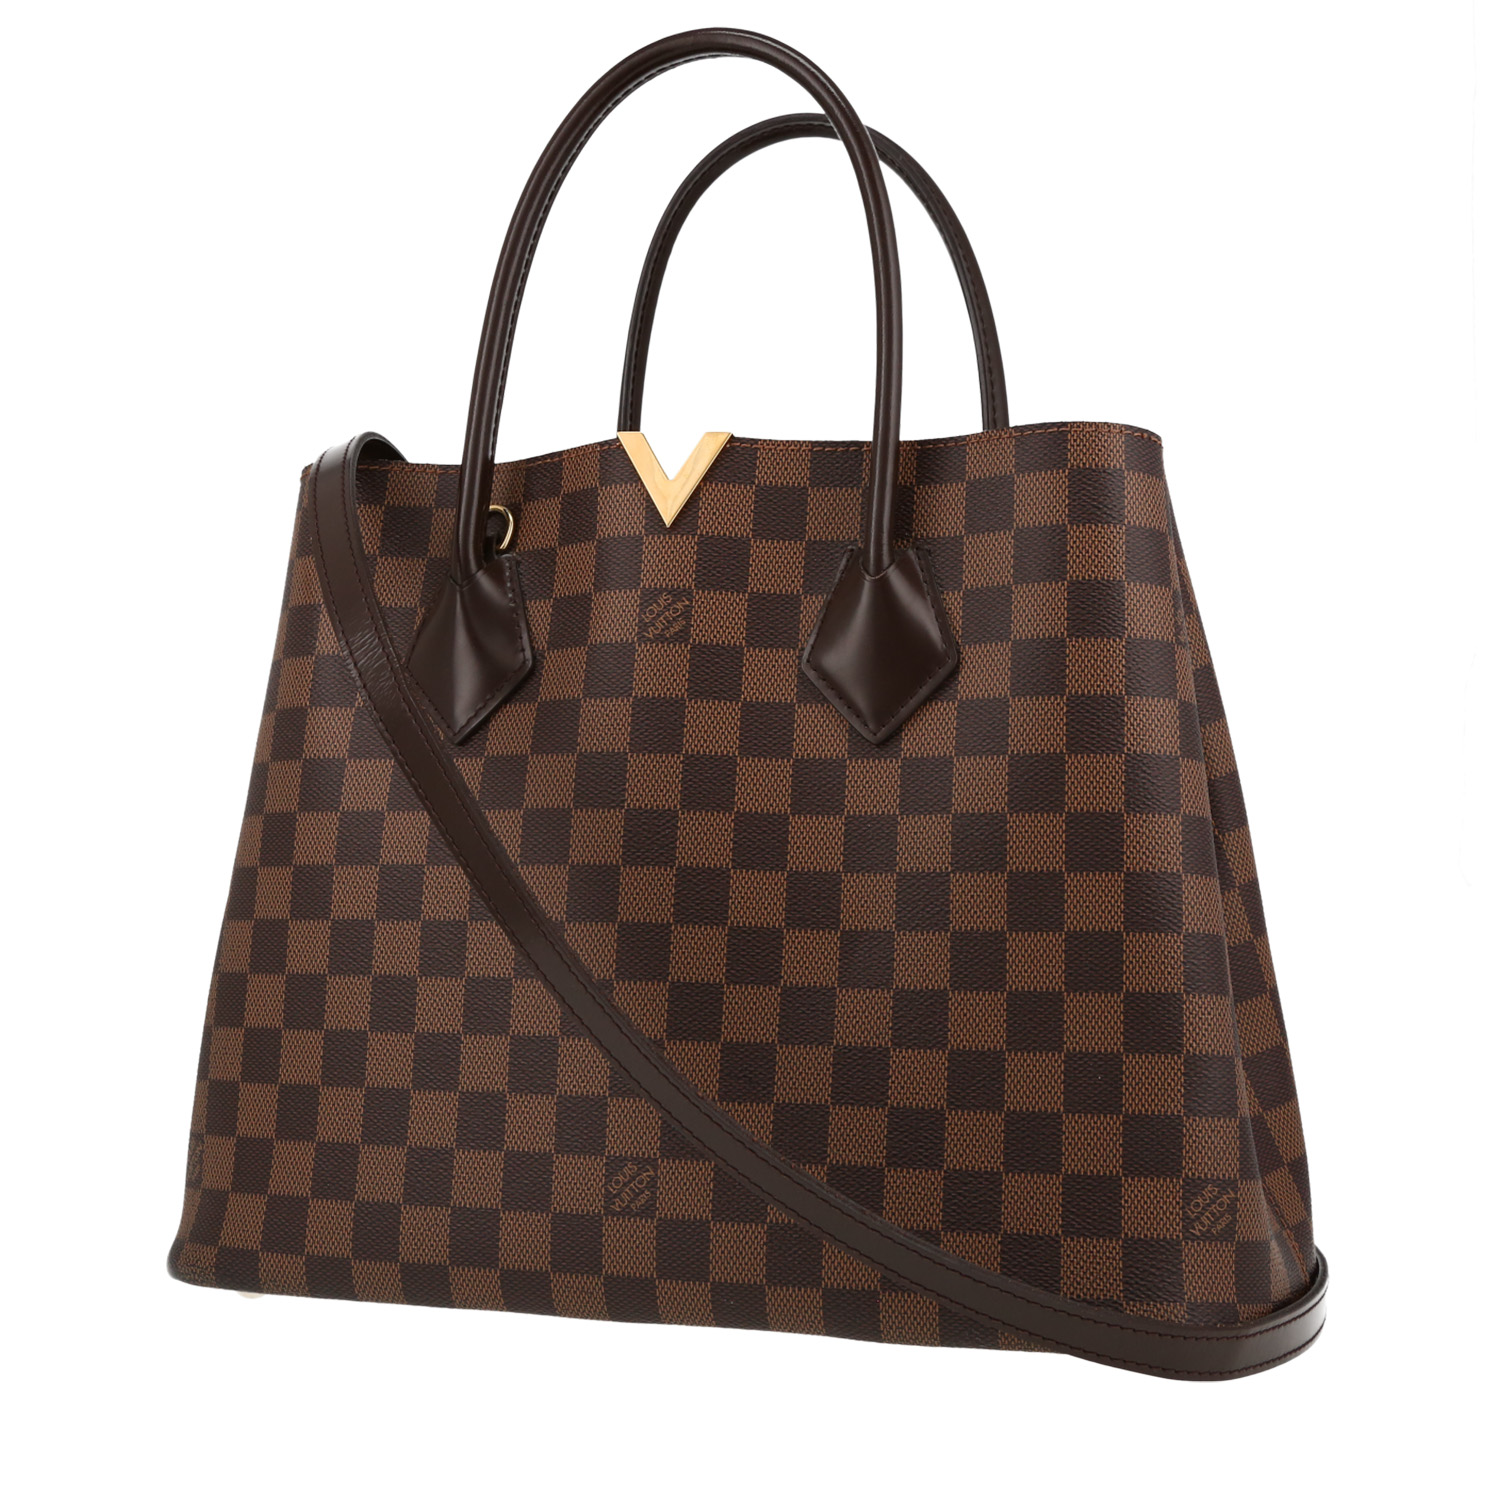 Louis Vuitton Kensington shopping bag in brown damier canvas and brown  leather